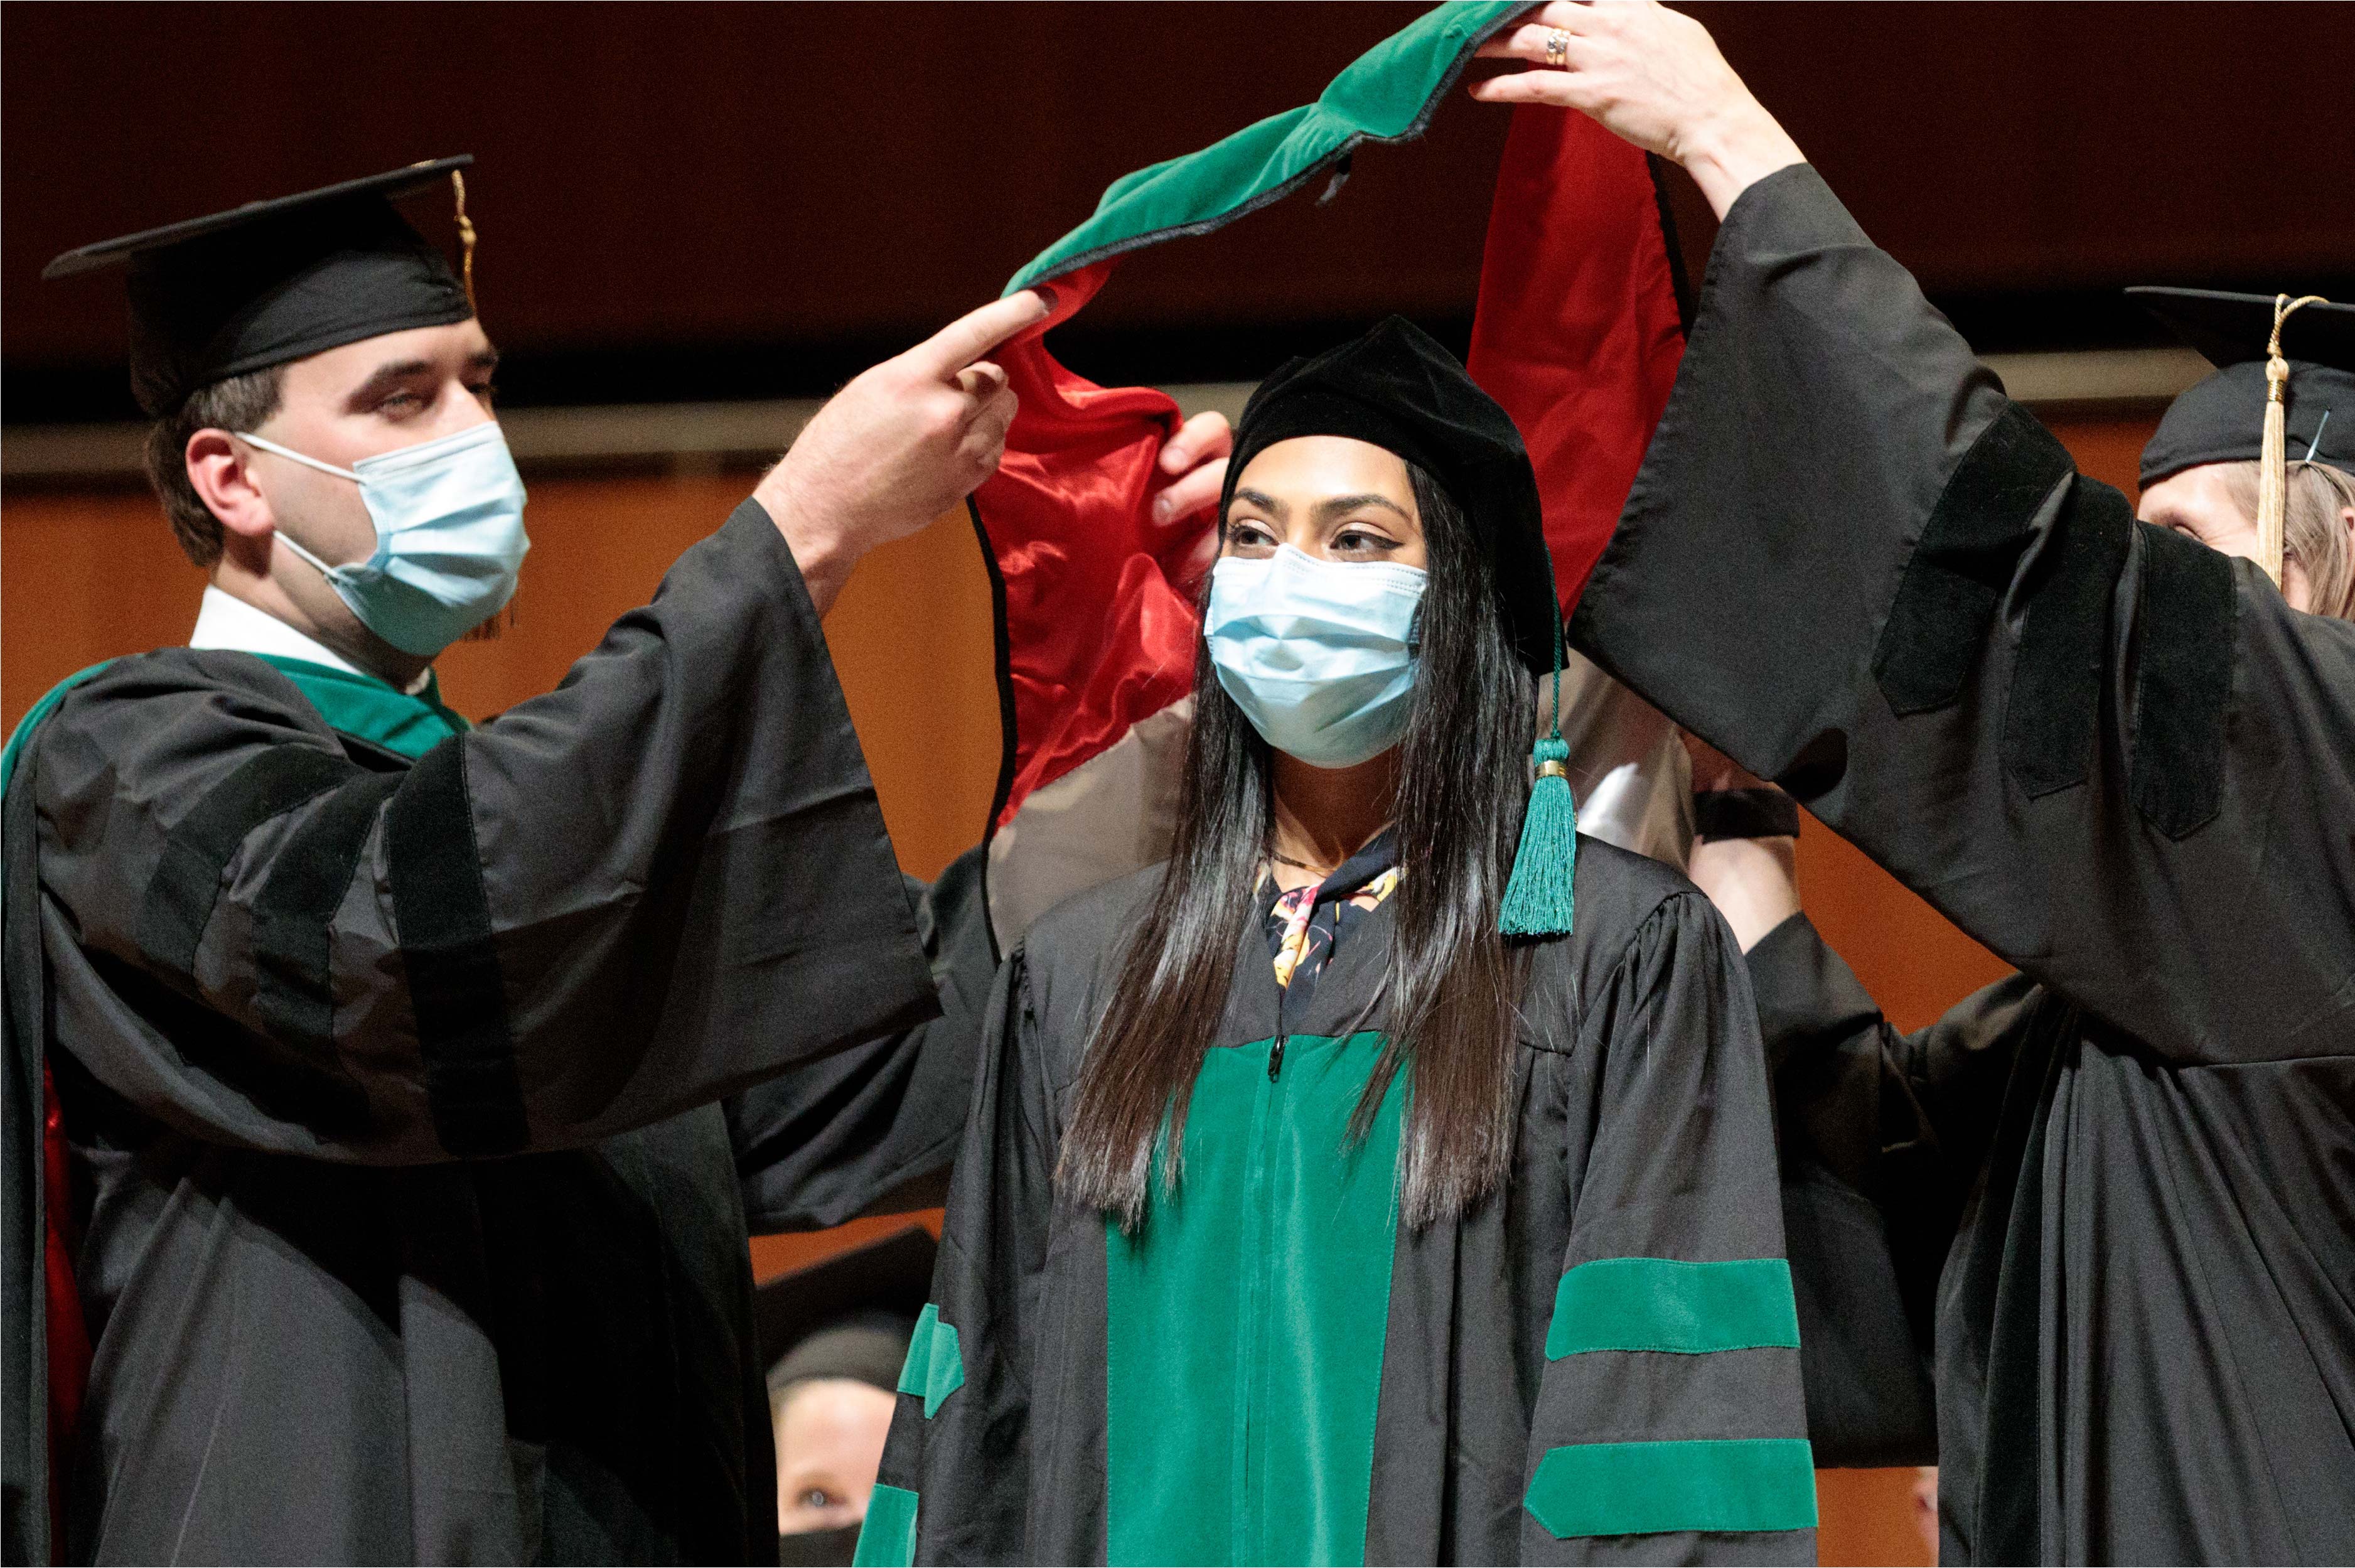 A woman wearing graduation robes participates in a hooding ceremony